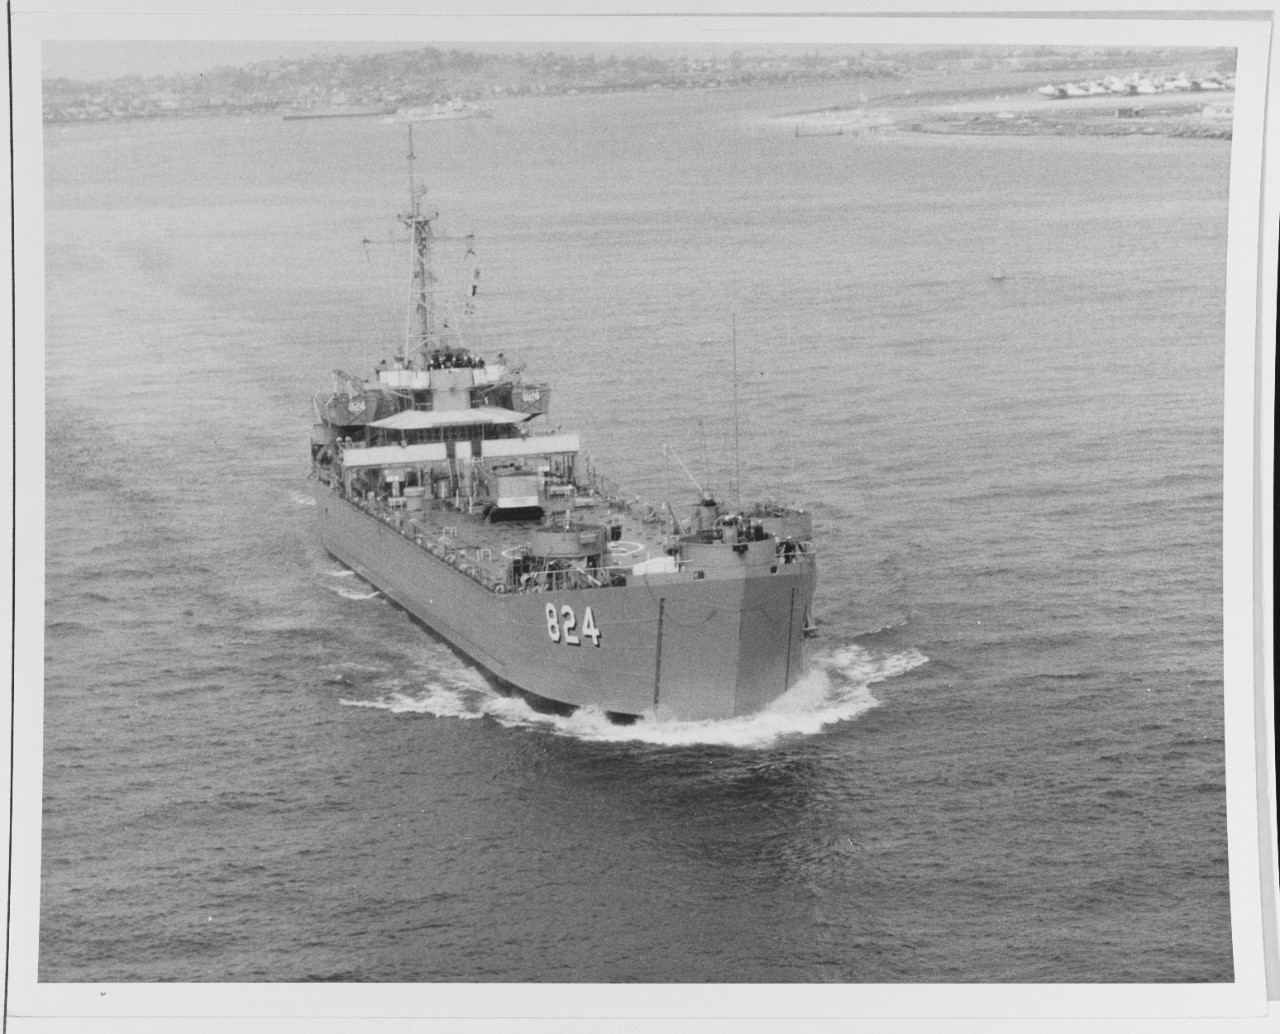 USS HENRY COUNTY (LST-824)